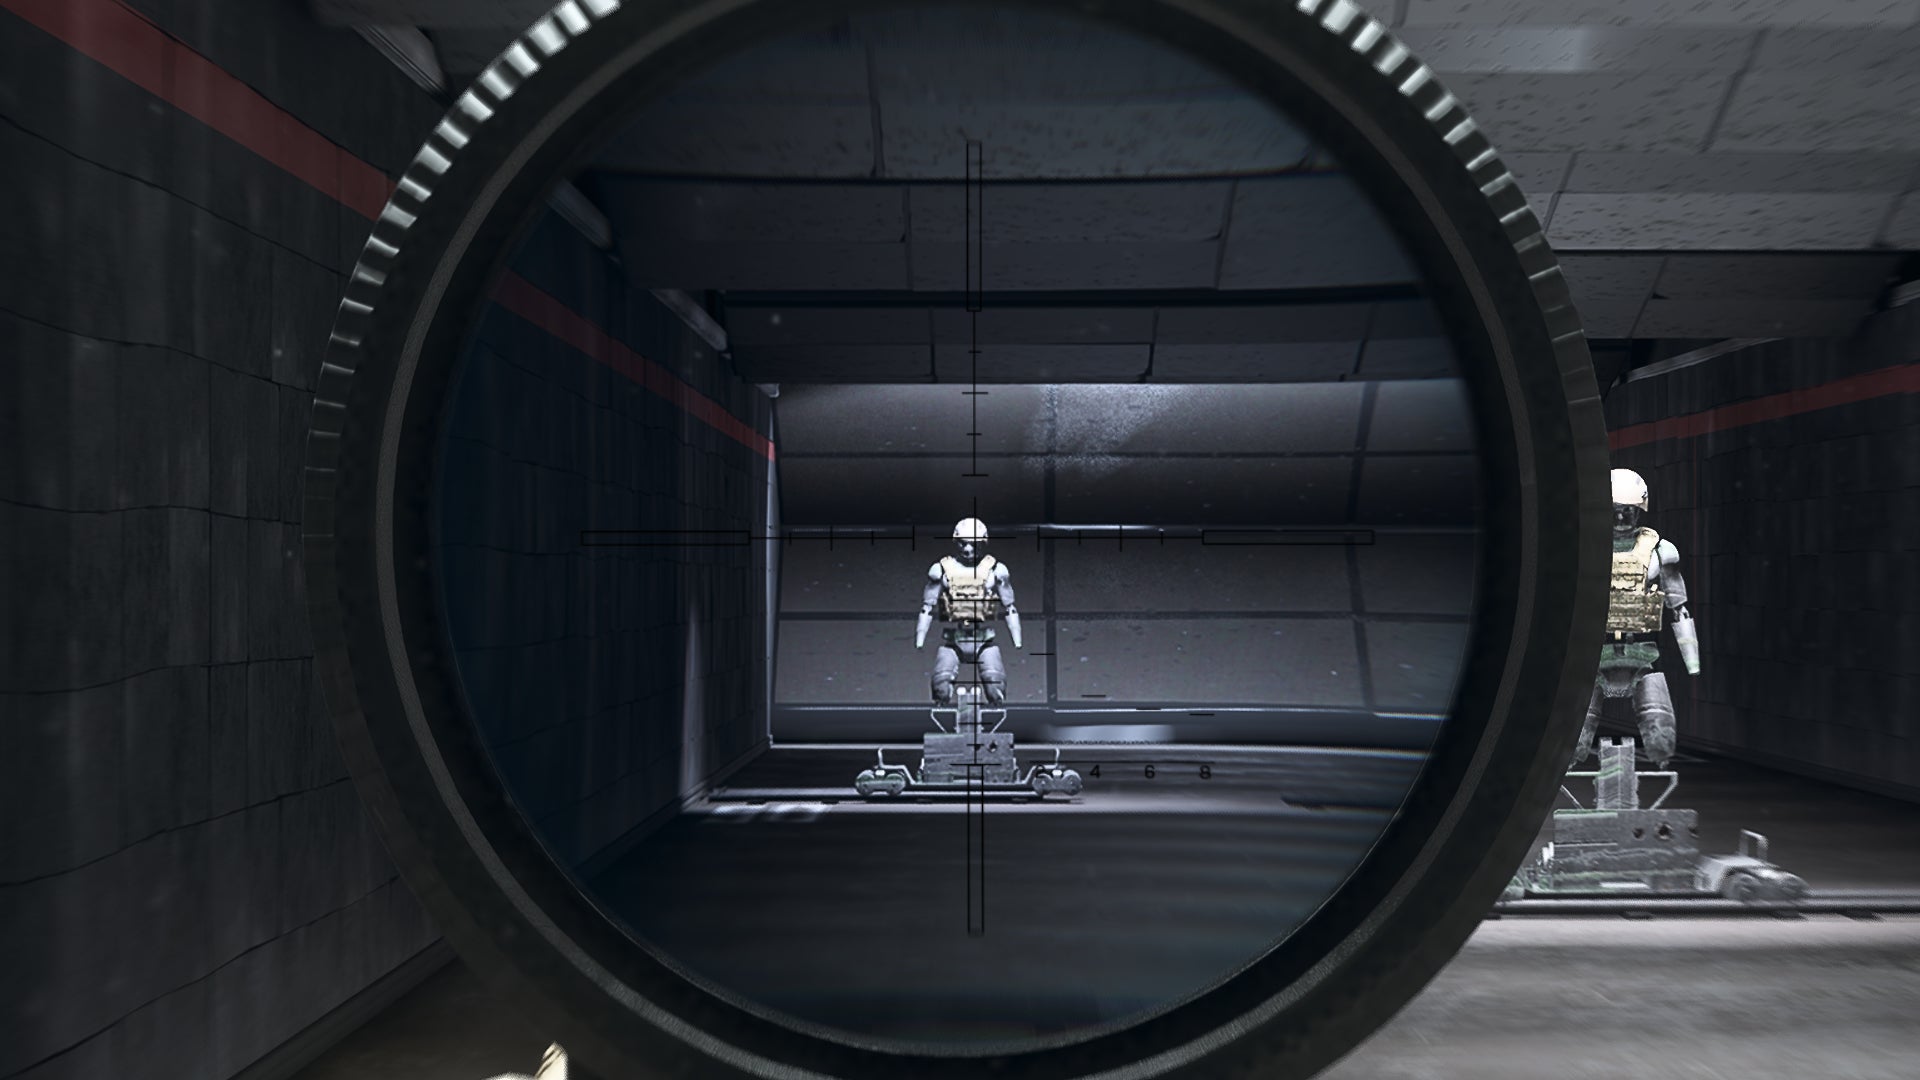 The player in Warzone 2.0 aims at a training dummy using the Lachmann Impact 9 optic attachment.